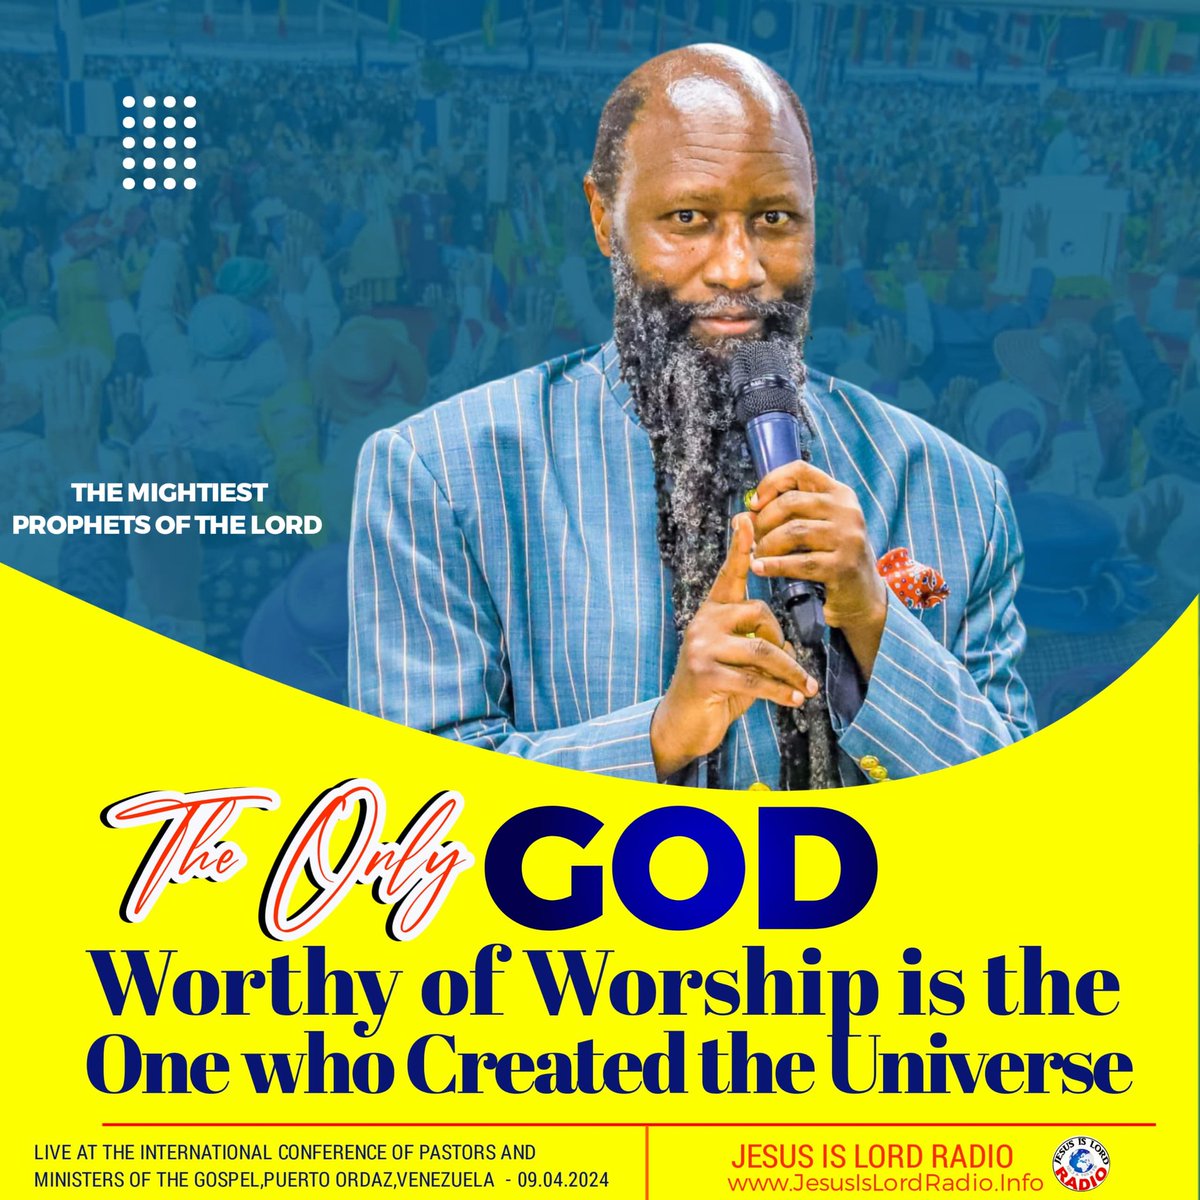 The only GOD WORTHY of WORSHIP is The HOLY GOD of ELIJAH & MOSES who has power to Raise Cripples from the dust. #JesusIsComing